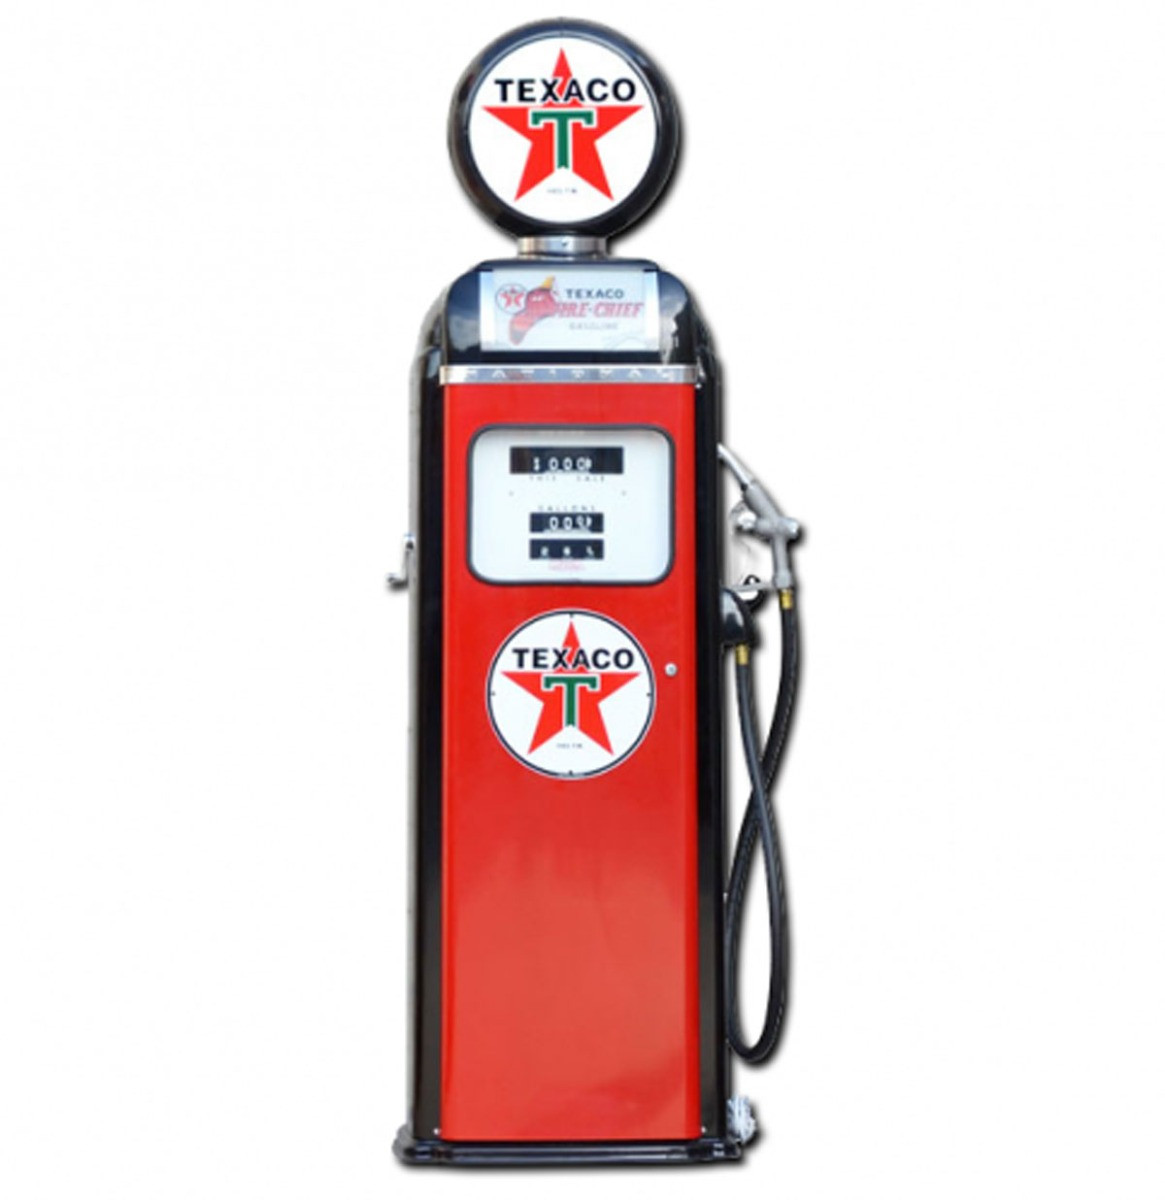 Texaco Fire-Chief National 360 Computer Face Benzinepomp - Rood & Zwart - Reproductie